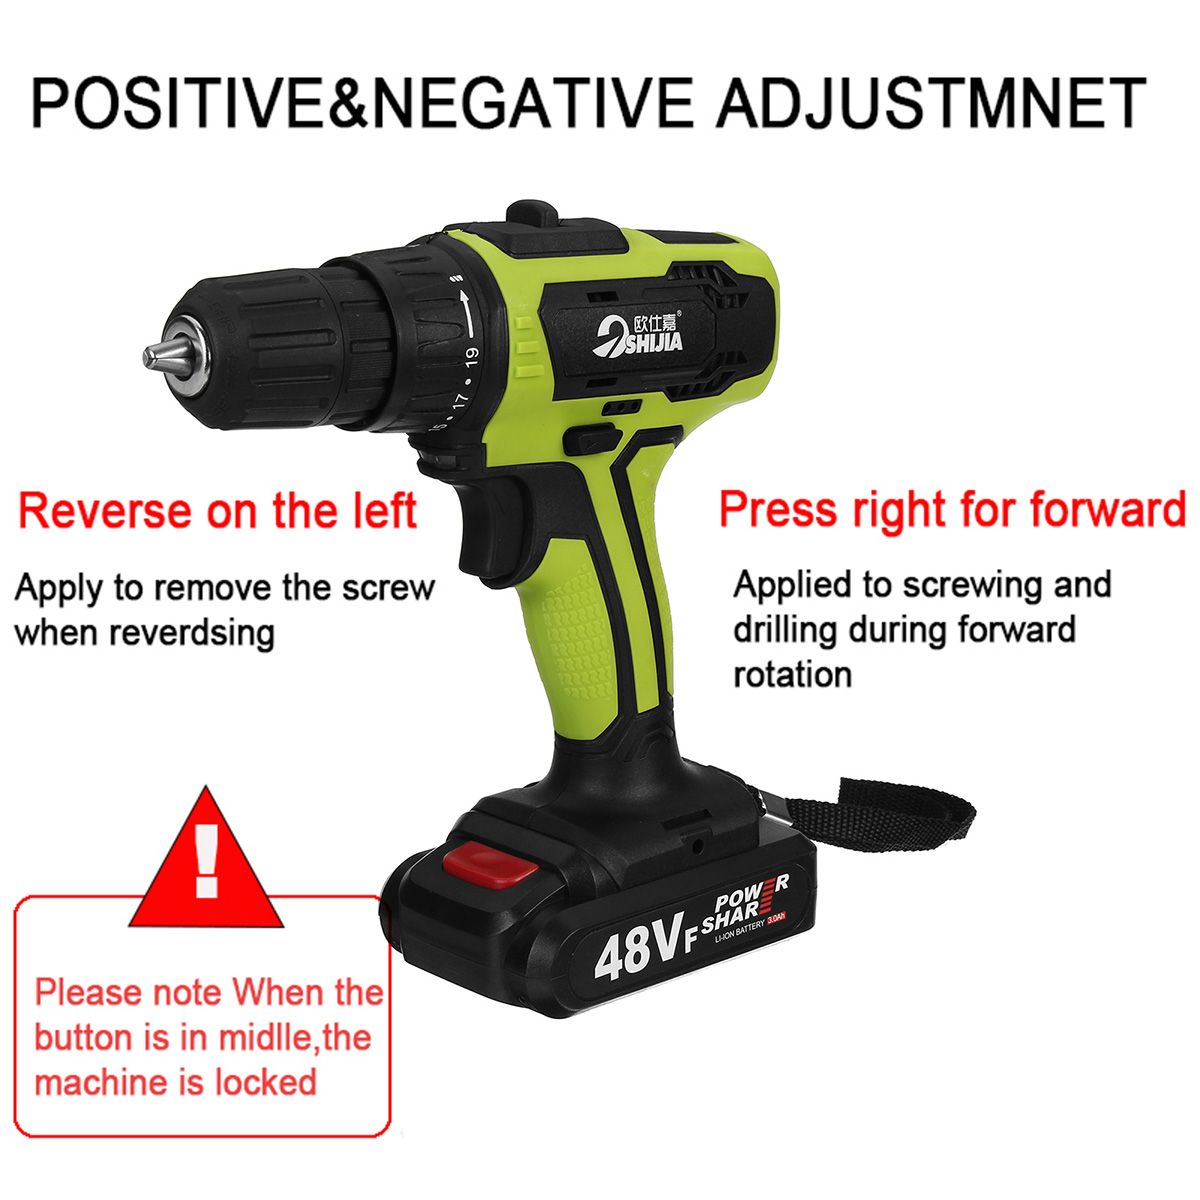 48VF-Cordless-Electric-Drill-Screwdriver-Driver-W-1-or-2-Li-ion-Battery-1707933